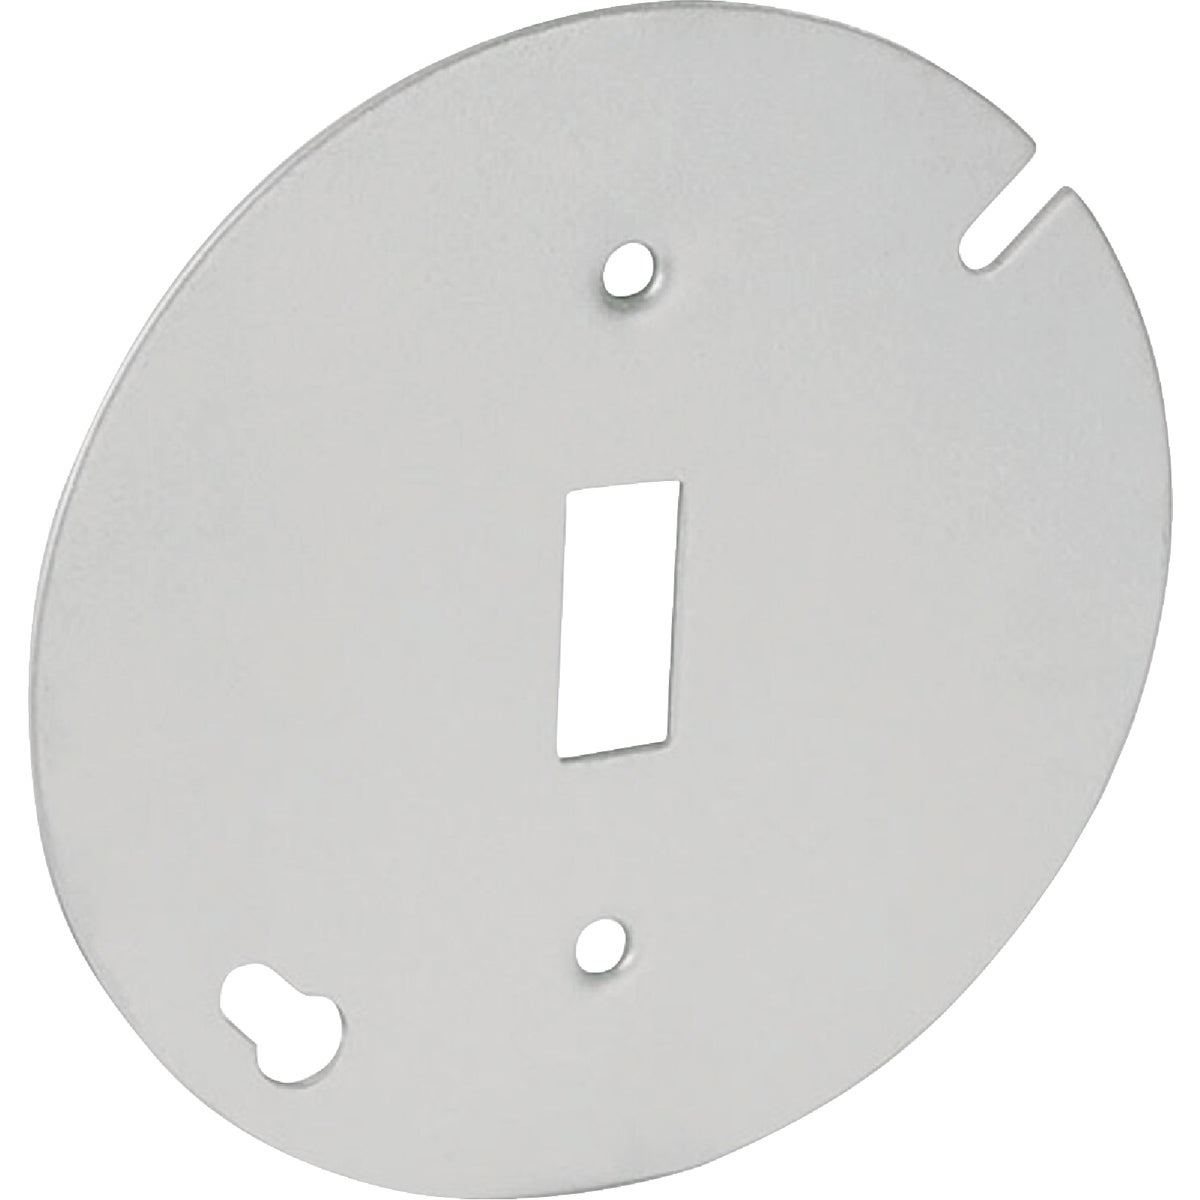 Item 507945, Octagon flat cover used to close off a 4 In.